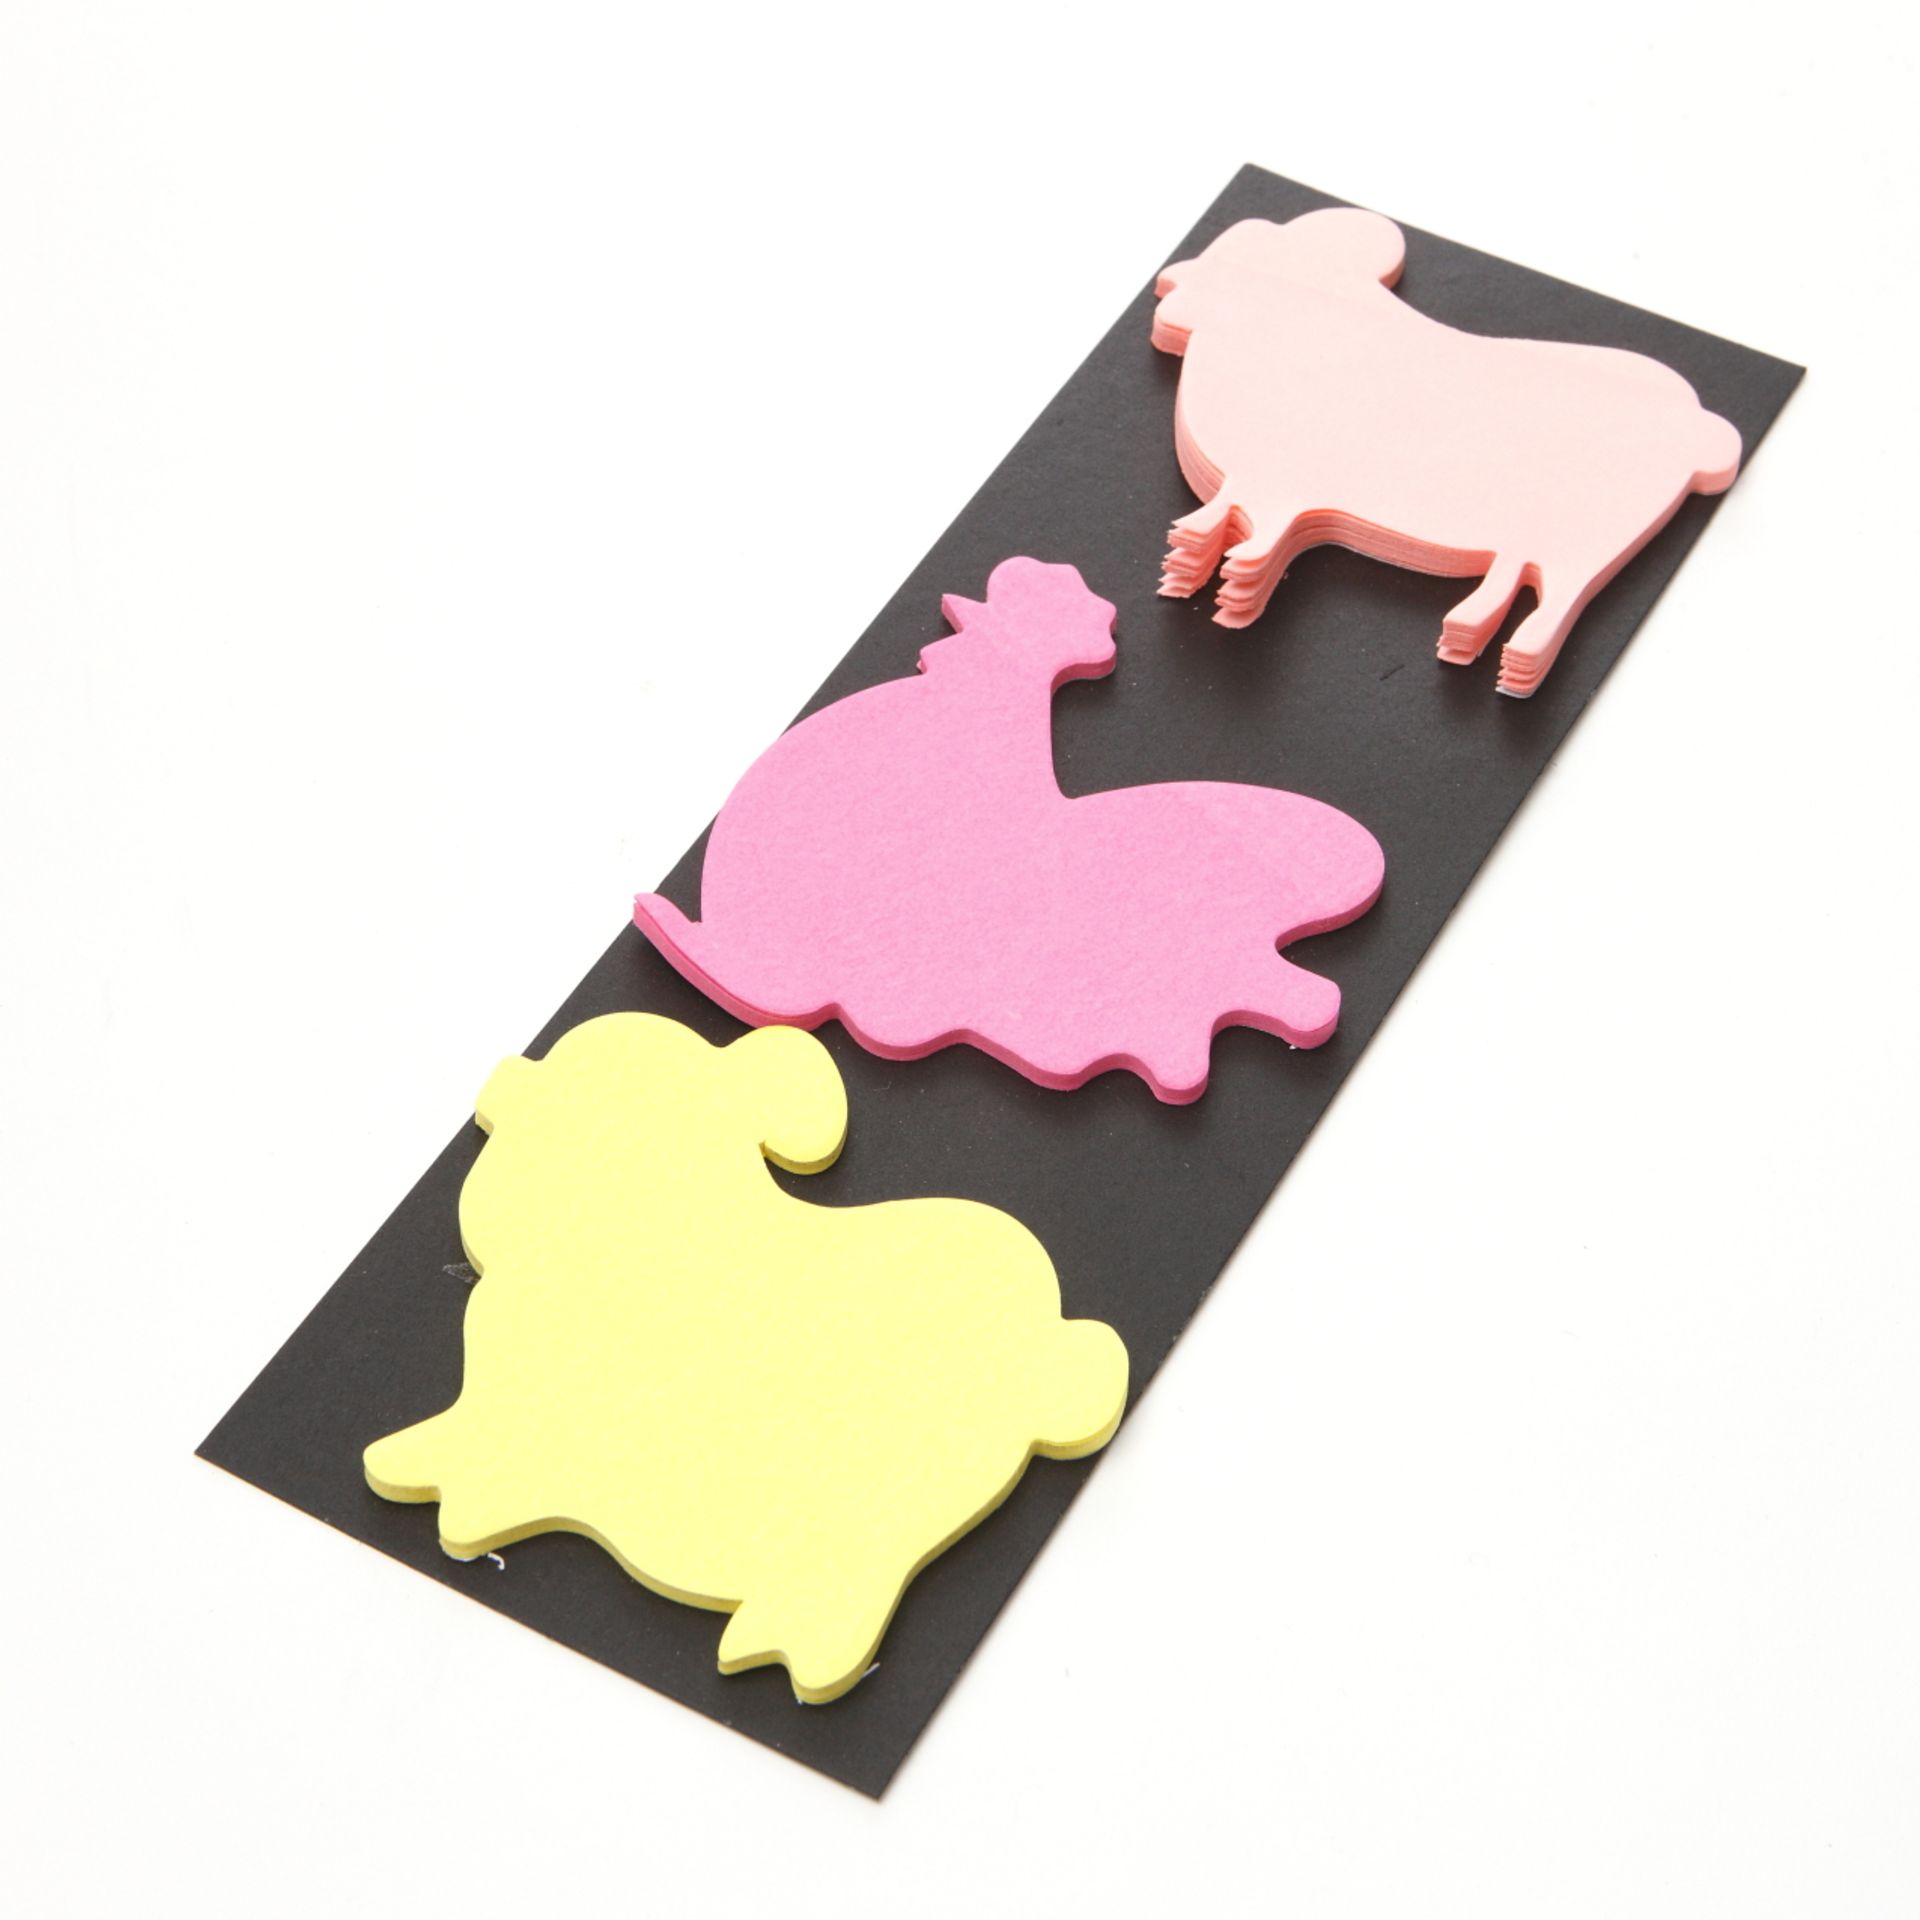 High Resale Value. 500 x Packs of animal shaped Posit Notes. Various shapes. All in retail Packing.